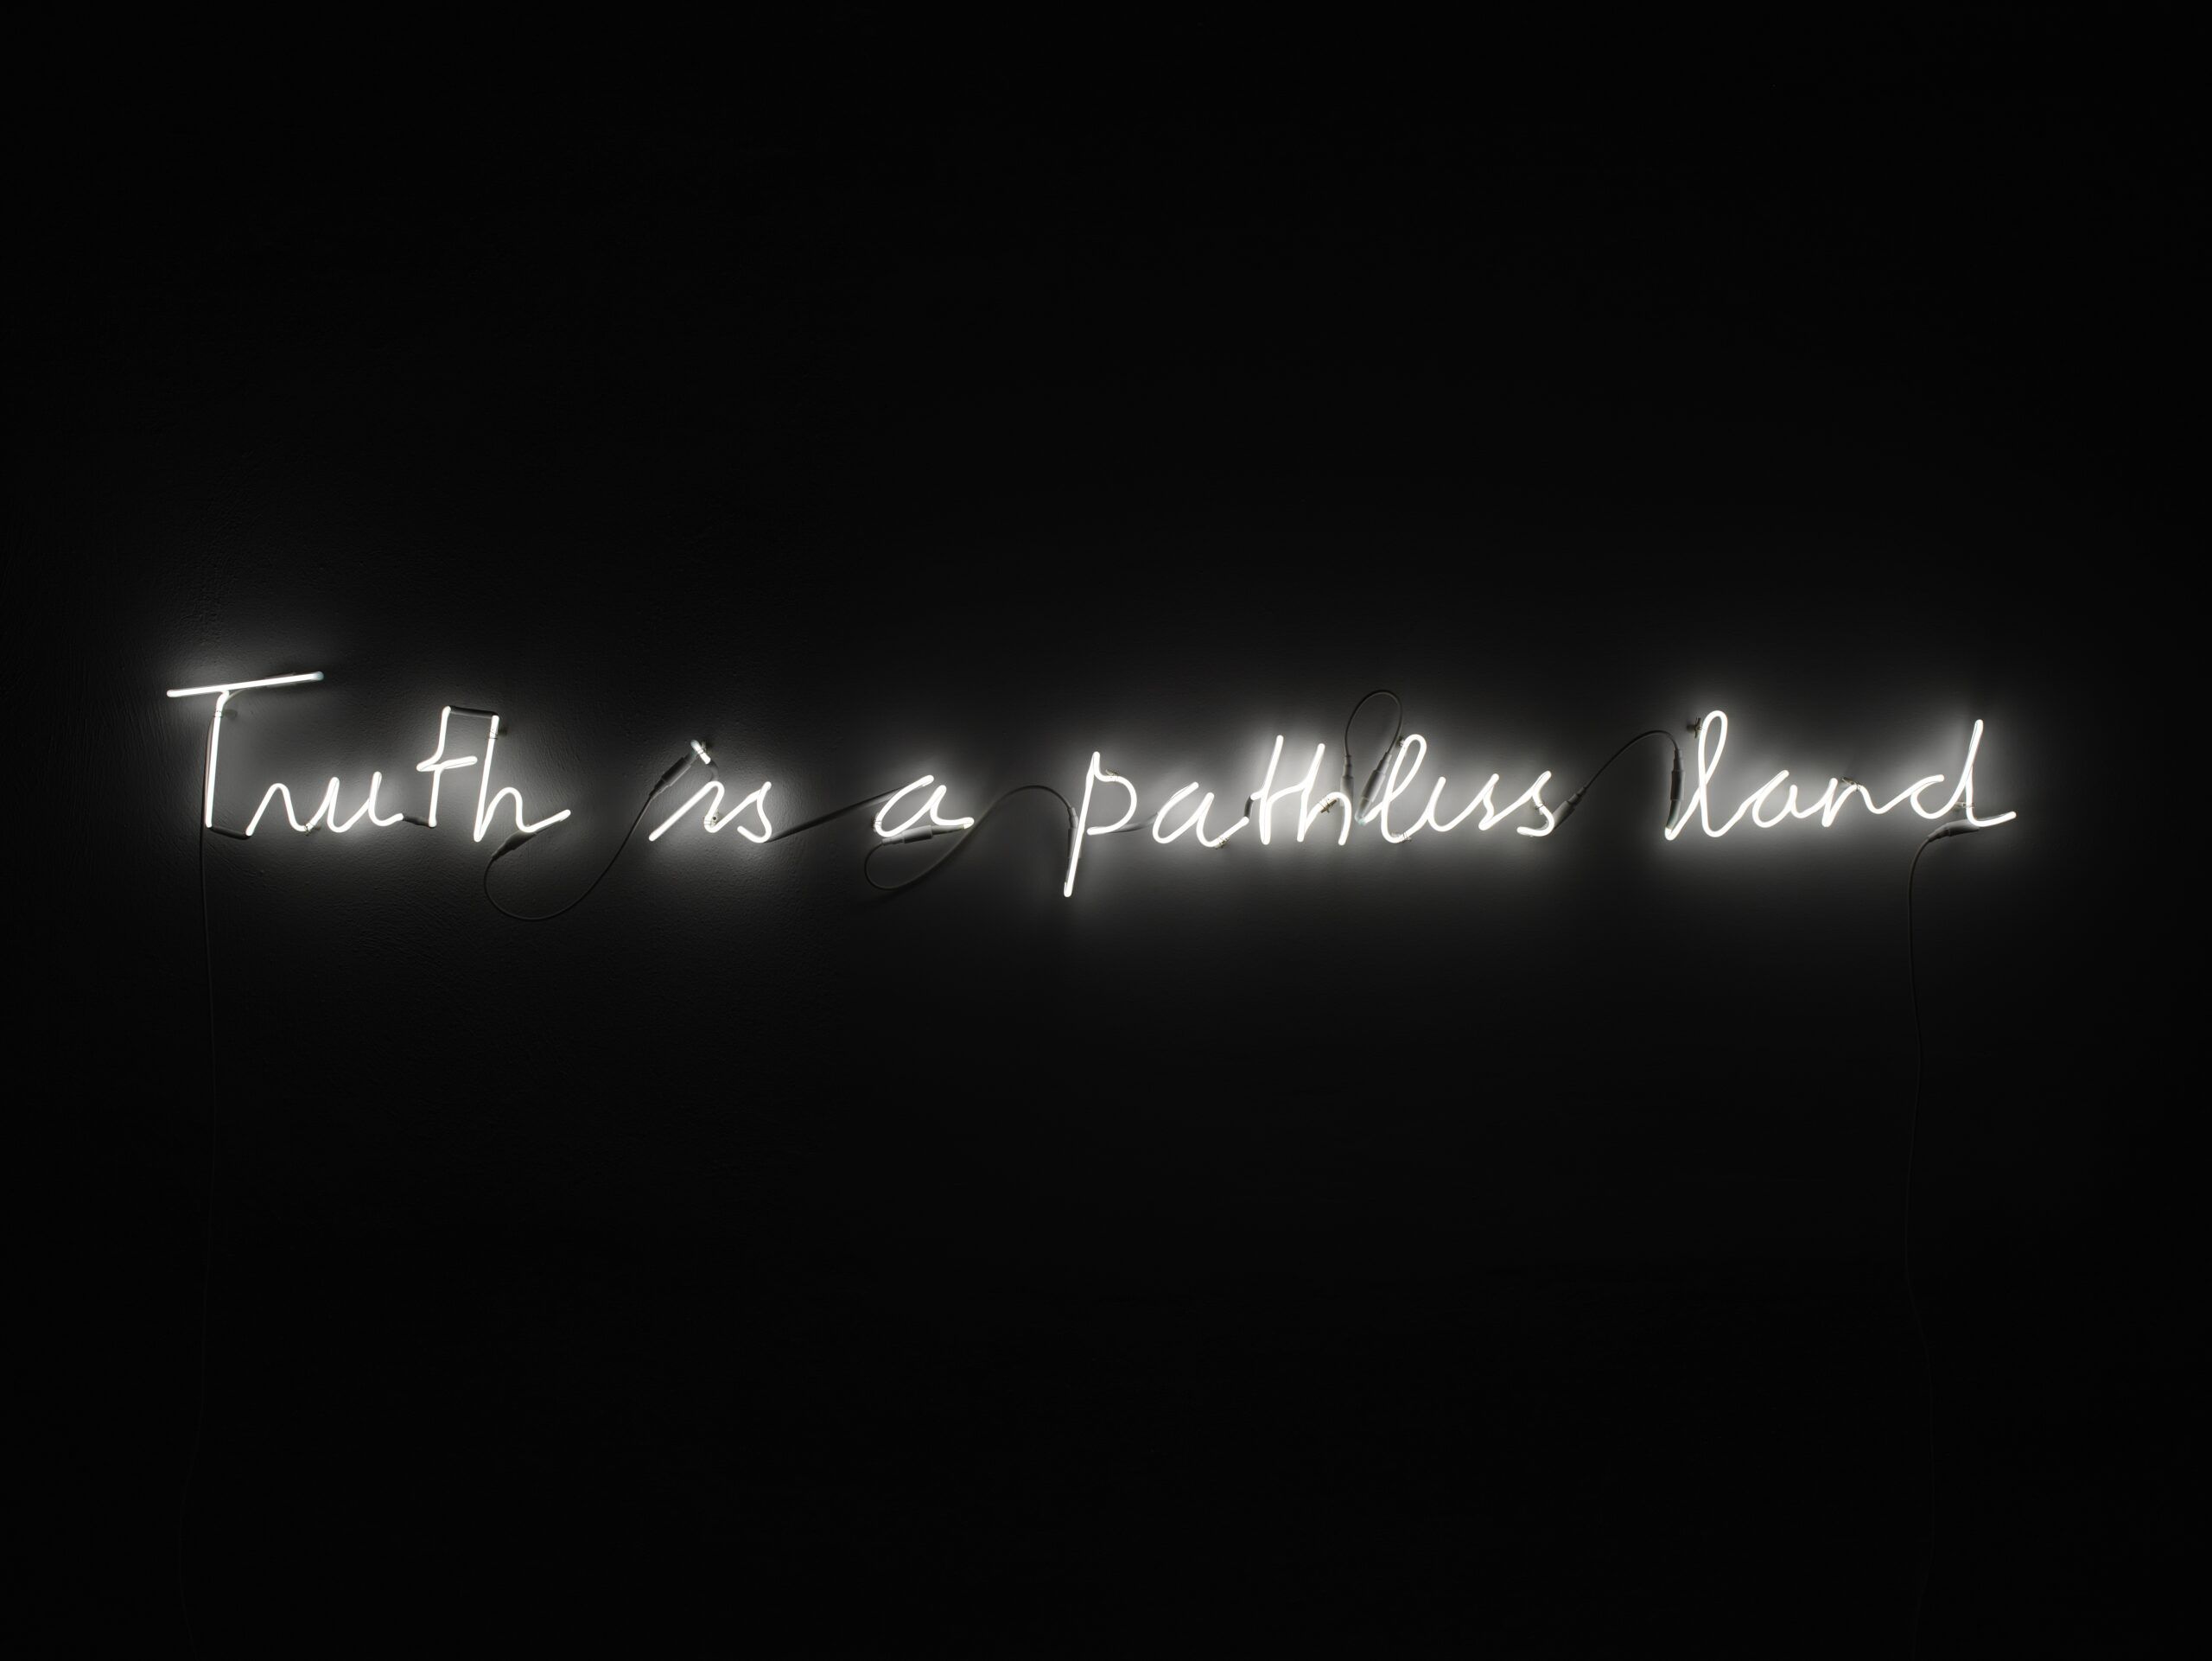 Valerio Rocco Orlando, Truth is a pathless land, 2015. White neon light, 20x200cm. Private Collection, Milan